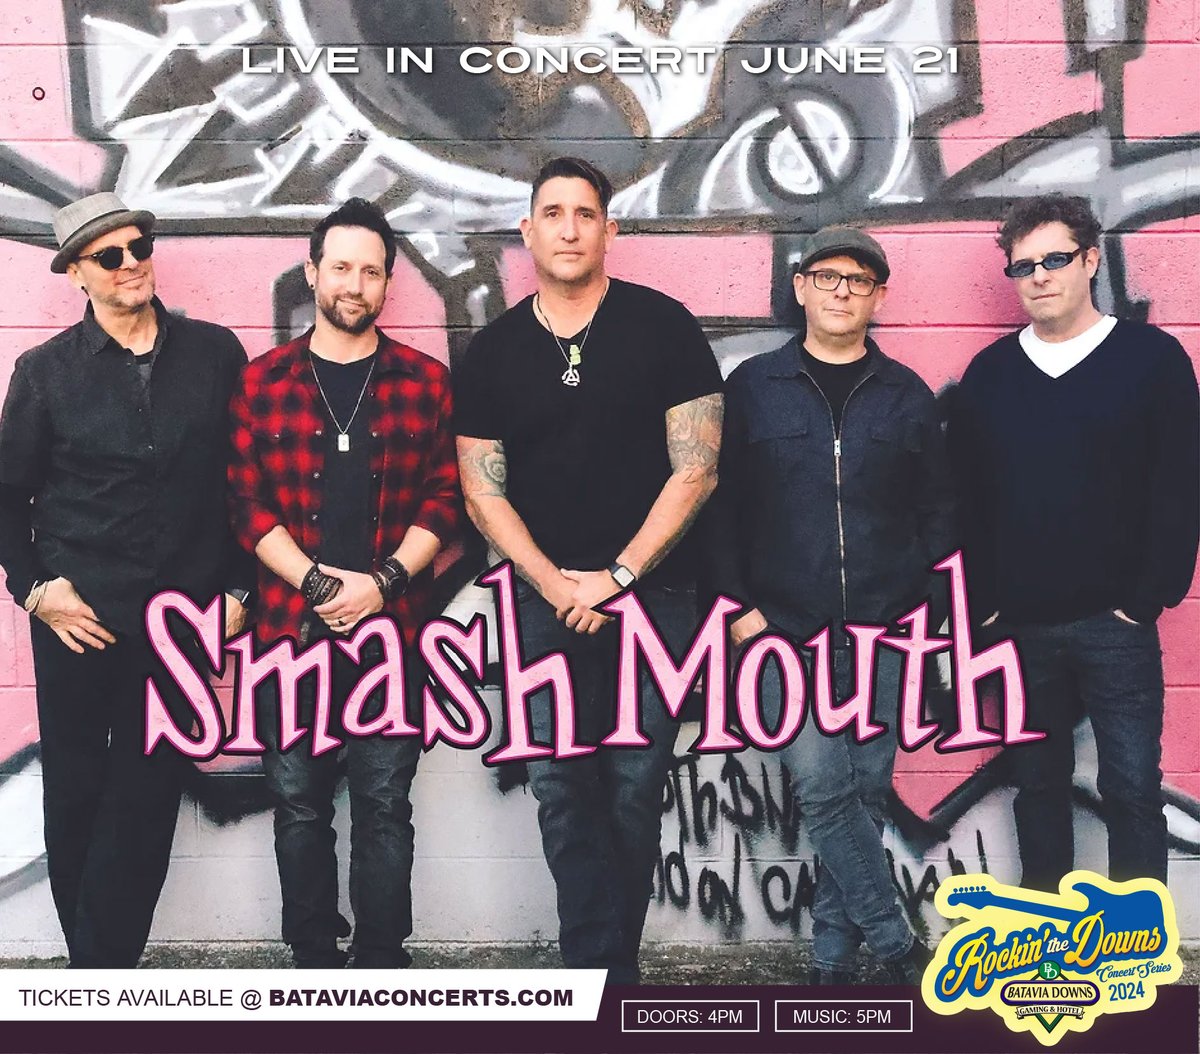 NEXT MONTH! The #RockinTheDowns summer concert series returns! ☀️🎵

Enjoy friends, food trucks, cold drinks, and live shows in the center of our historic racetrack!

June's Concerts ⬇️
• June 21 - SmashMouth
• June 28 - Barracuda - America's Heart Tribute
All tickets come with